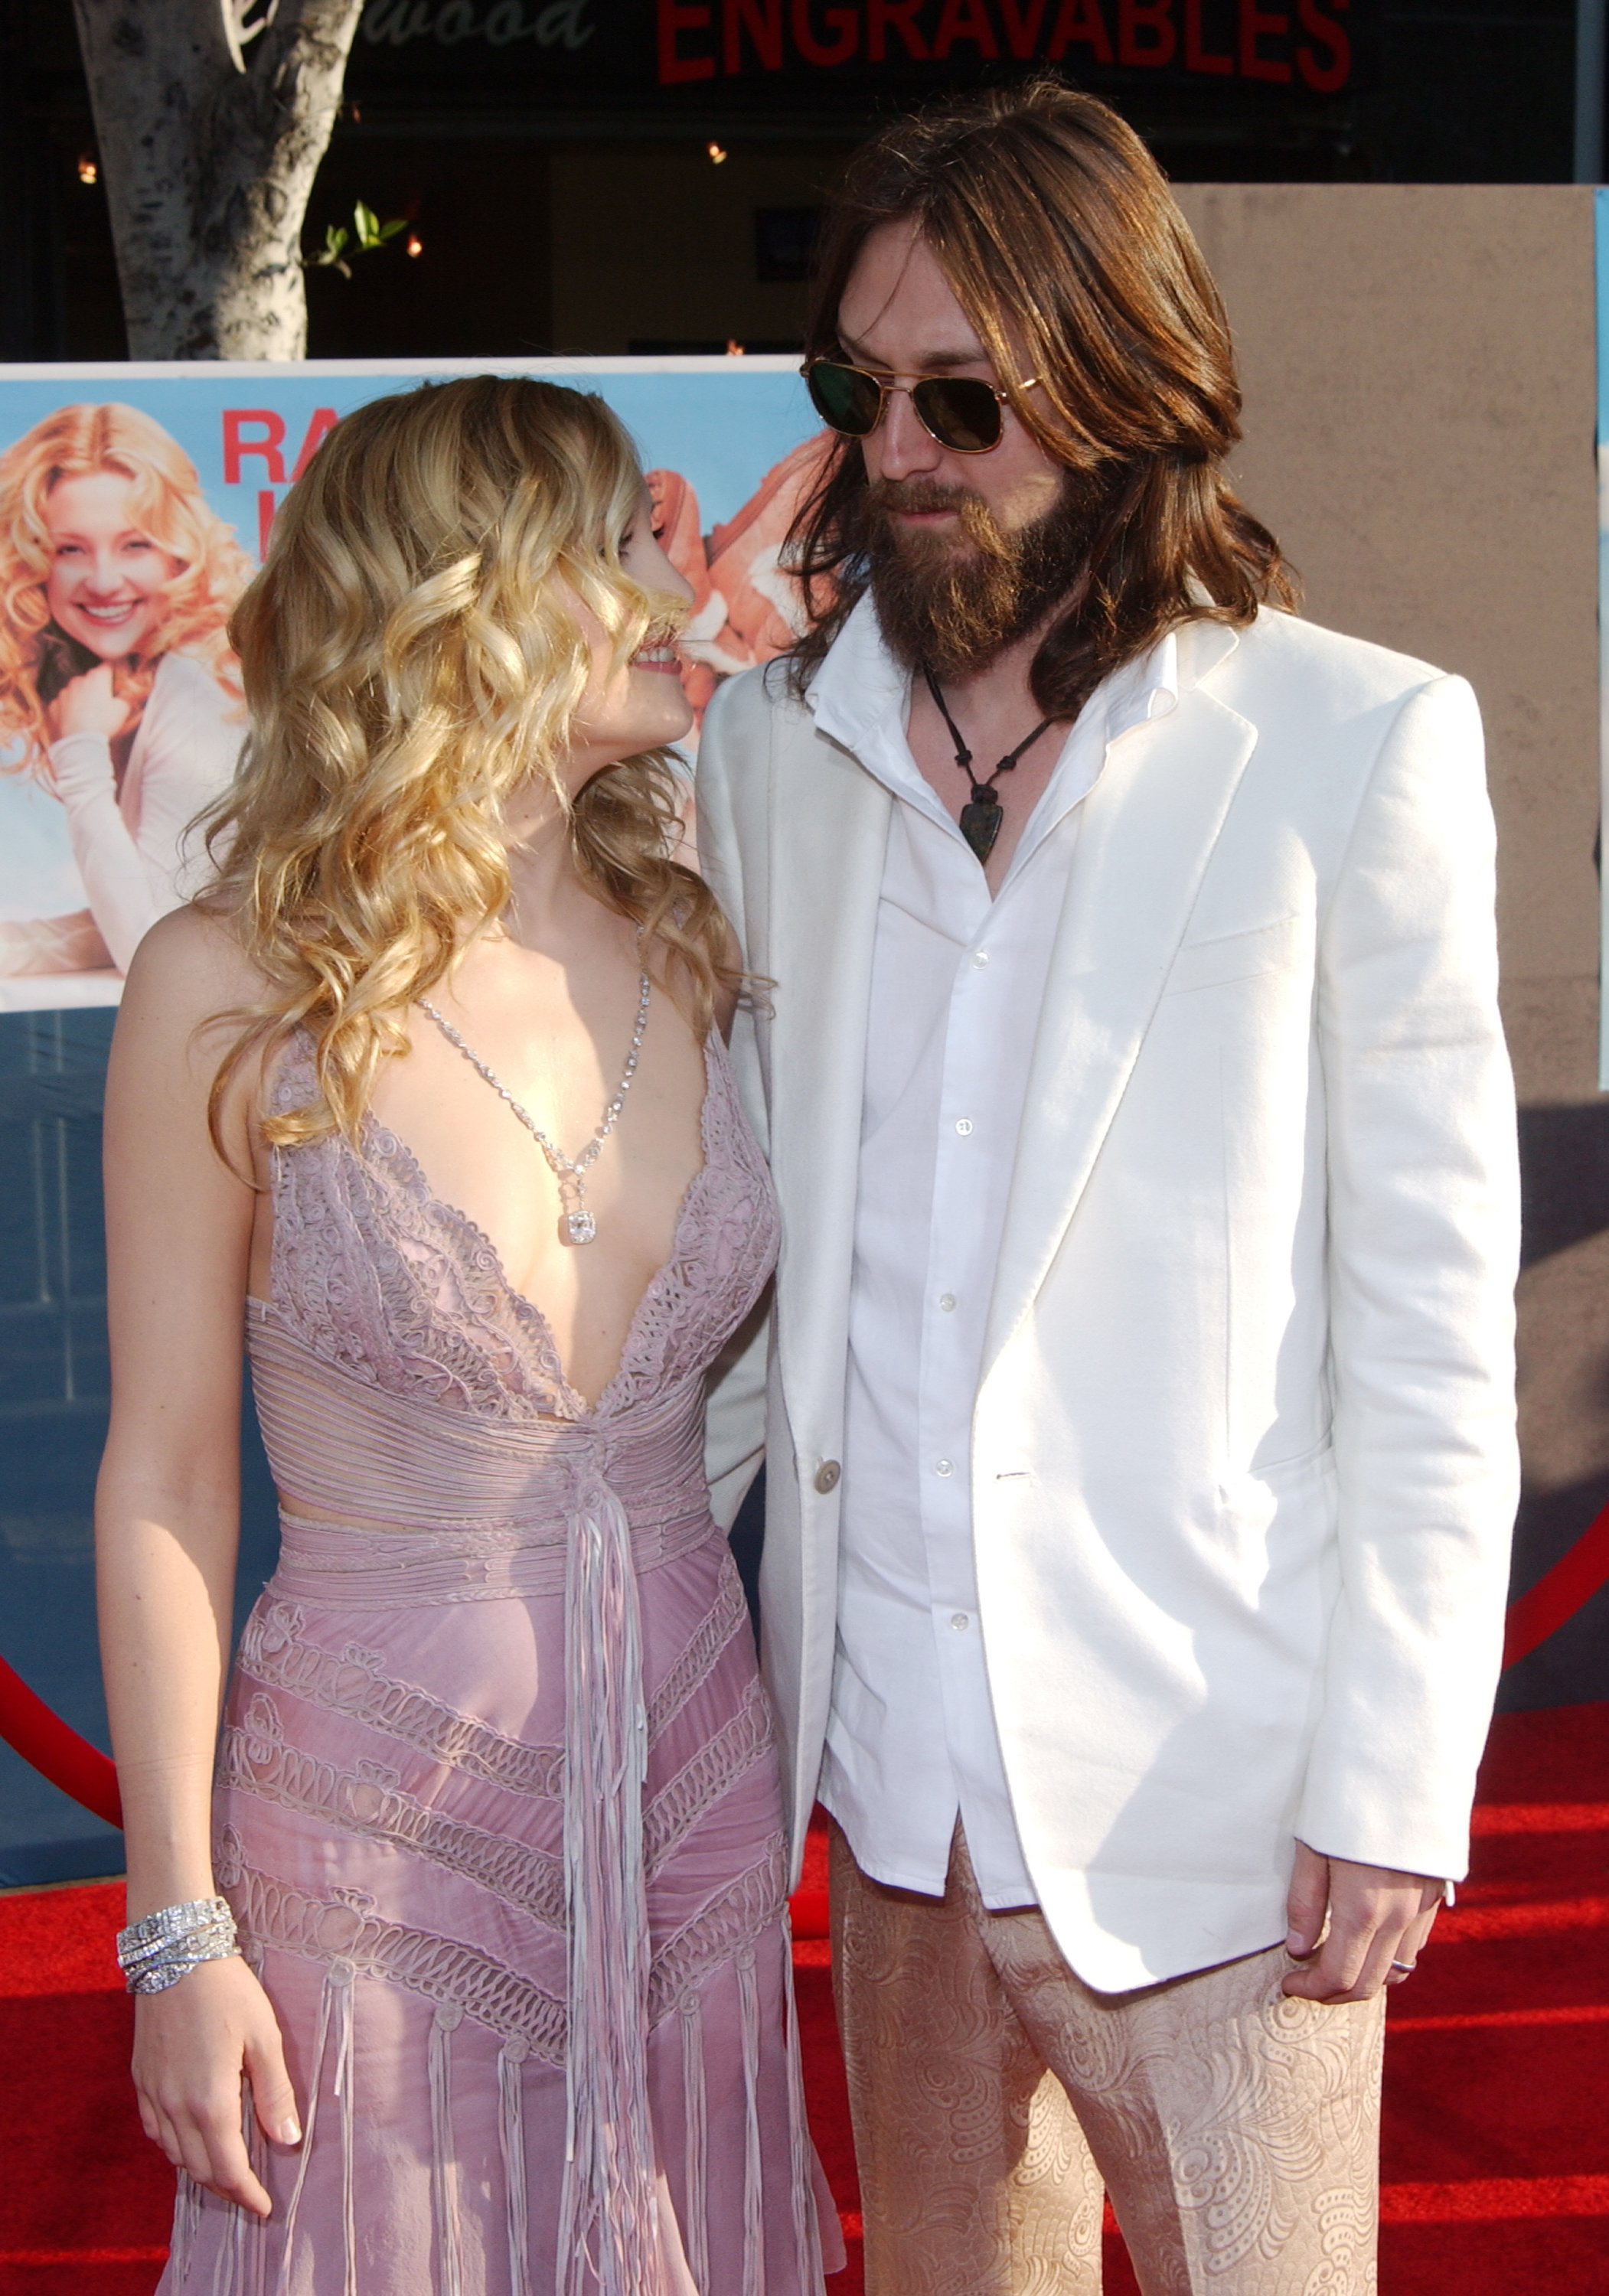 Kate Hudson and Chris Robinson during "Raising Helen" Los Angeles premiere at El Capitan Theatre in Hollywood, California. / Source: Getty Images